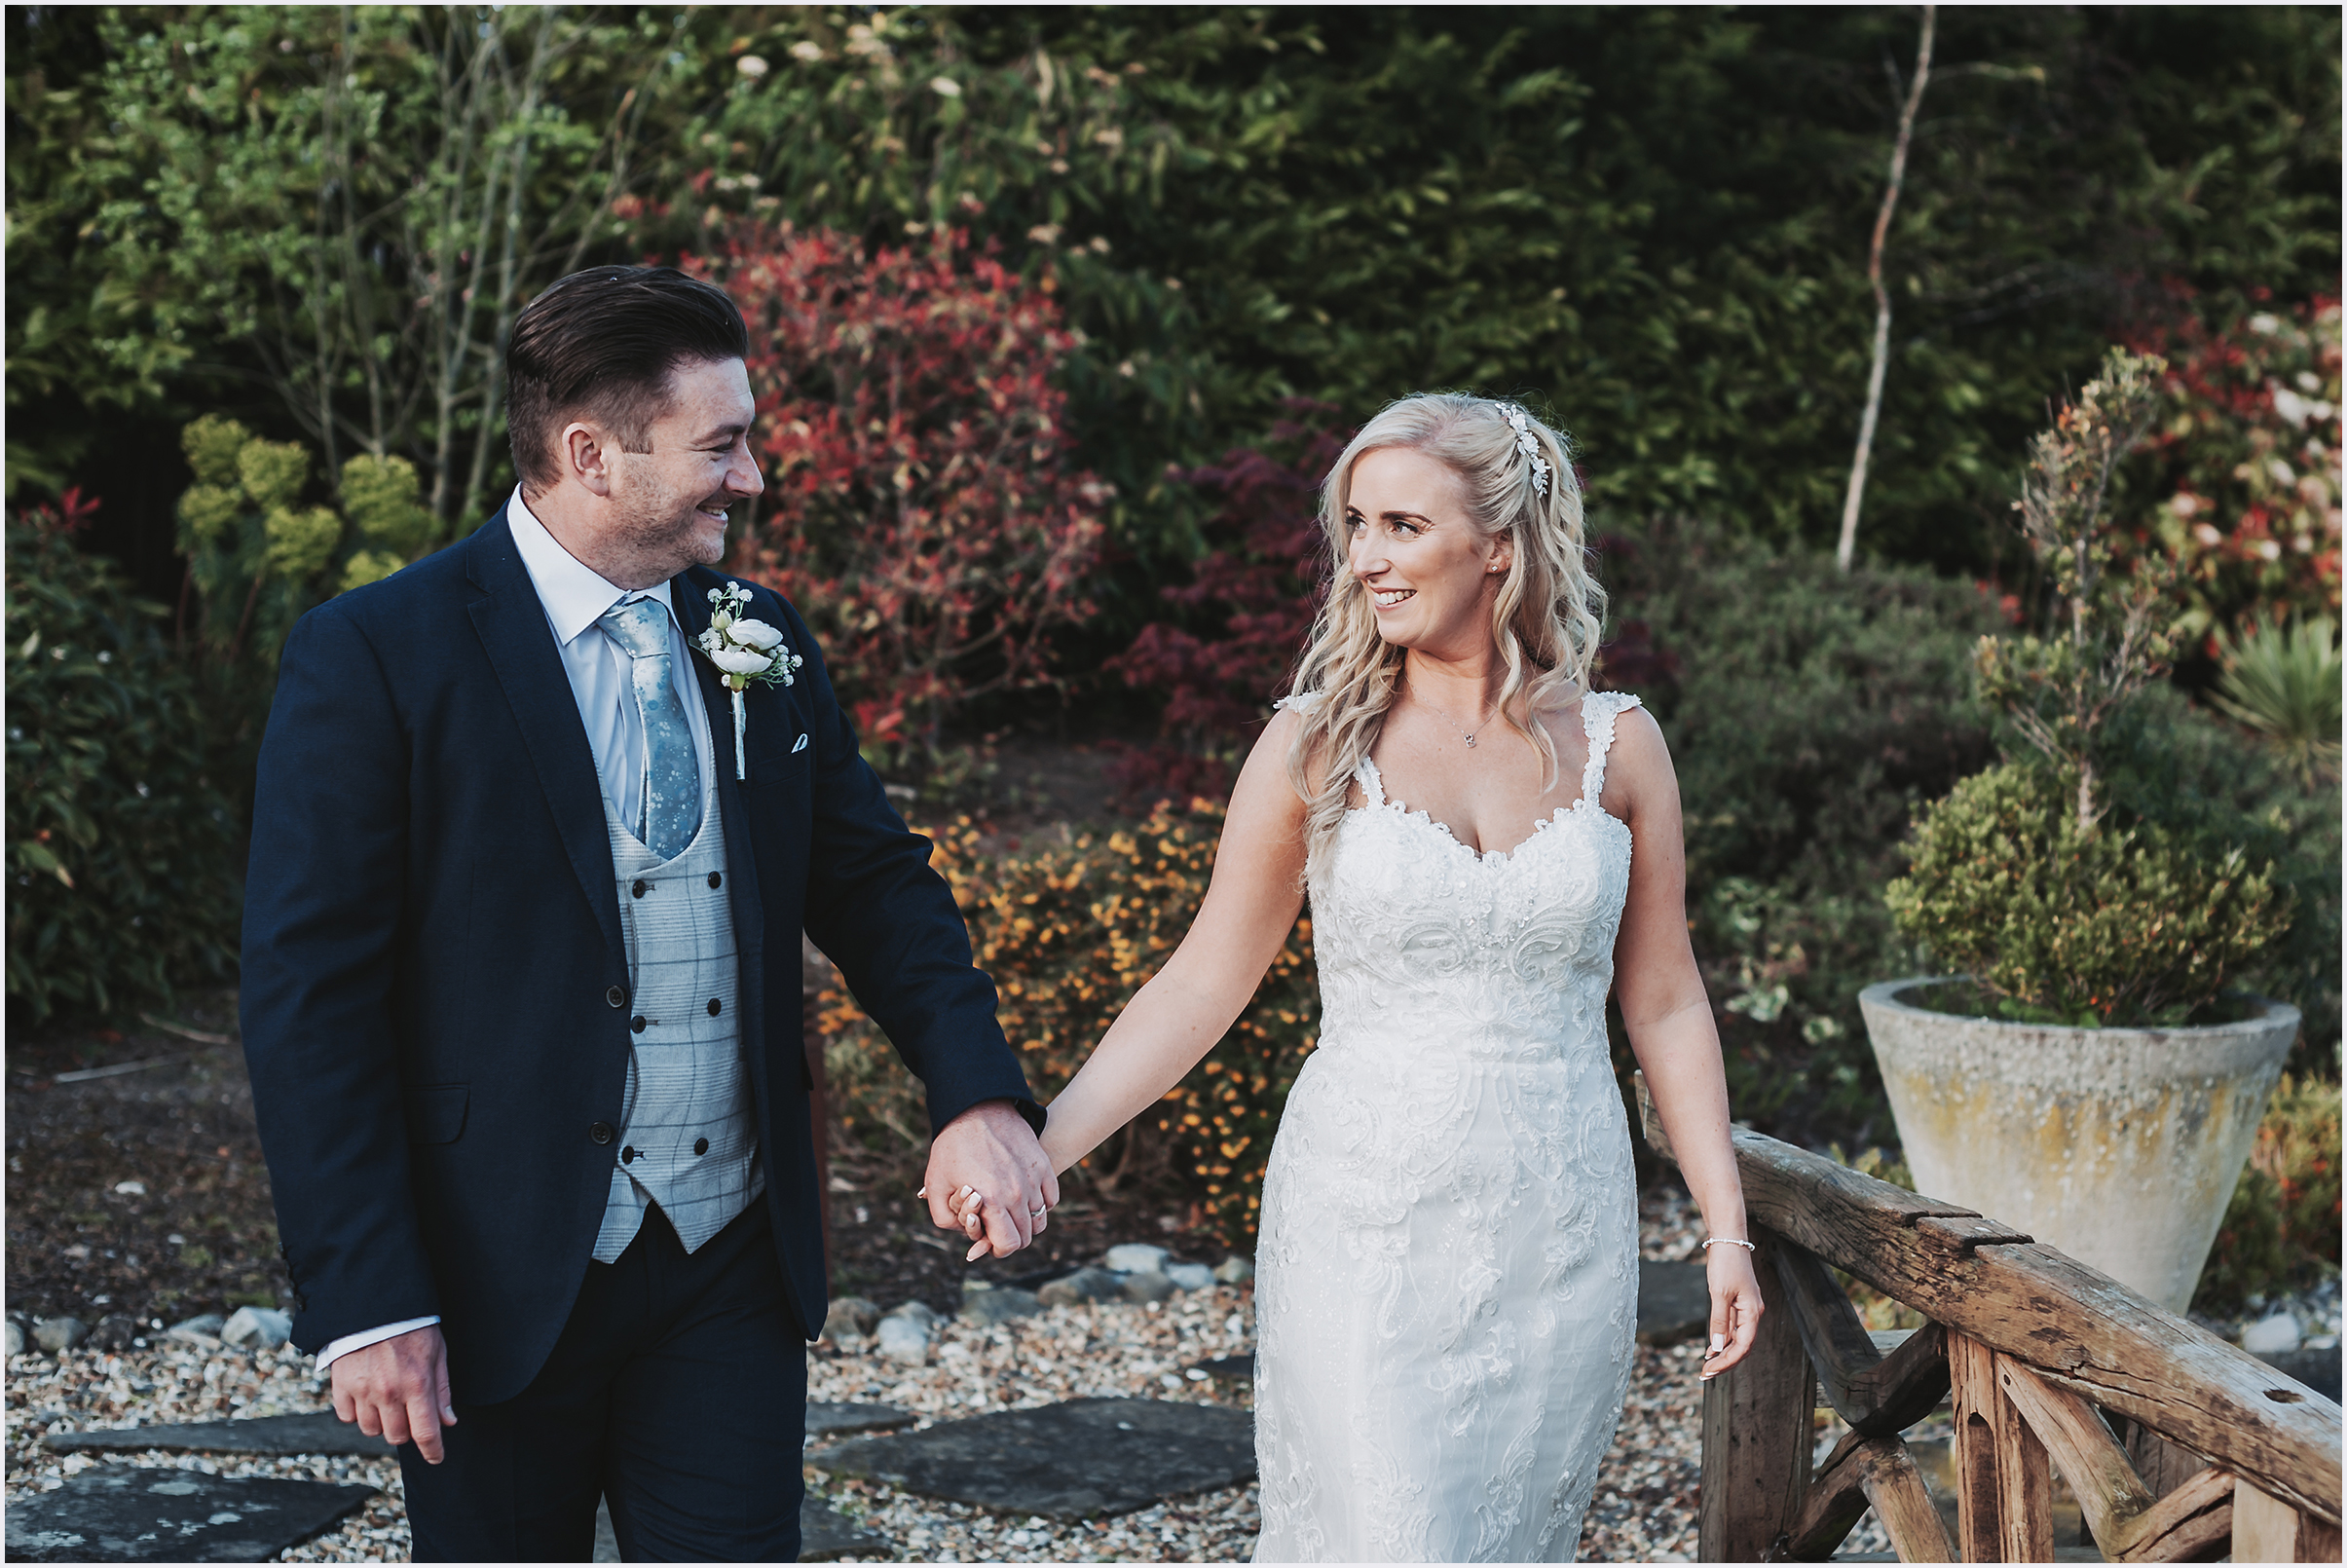 A bride and groom walk hand in hand smiling at each other during their couples photographs.  Image captured by Cheshire wedding photographer Helena Jayne Photography